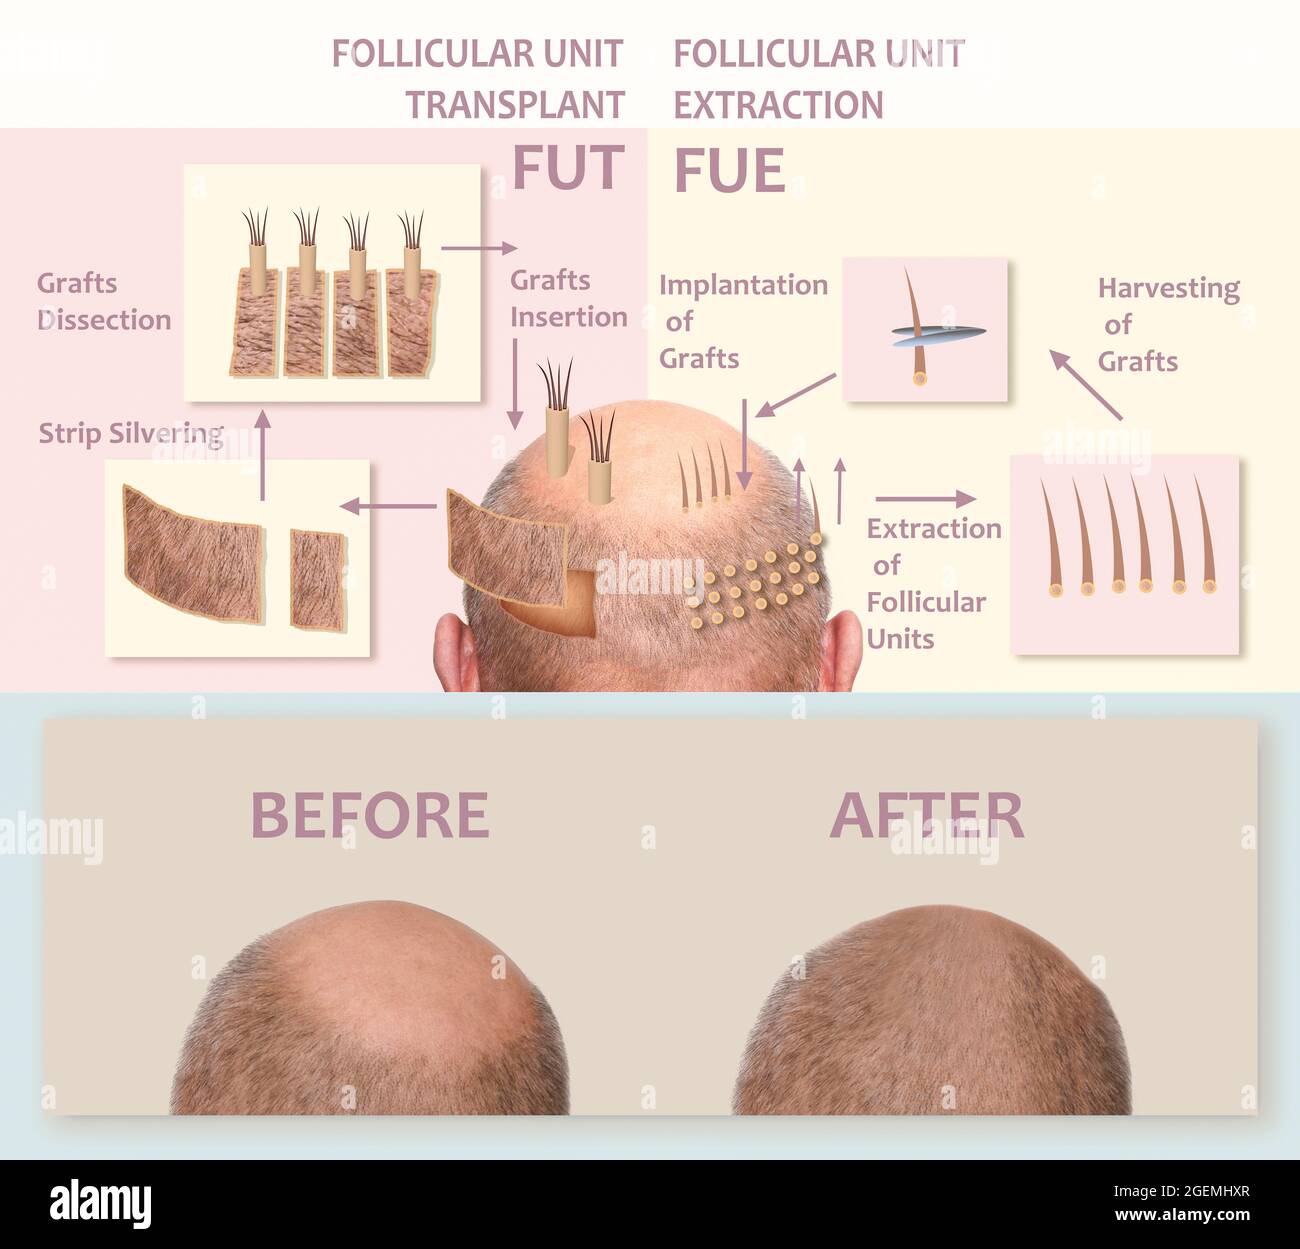 Methods of hair transplantation FUT and FUE fue with transplant as infographic element of illustration. Human alopecia or hair loss problem on adult senior or mature man. Before and after concept Stock Photo